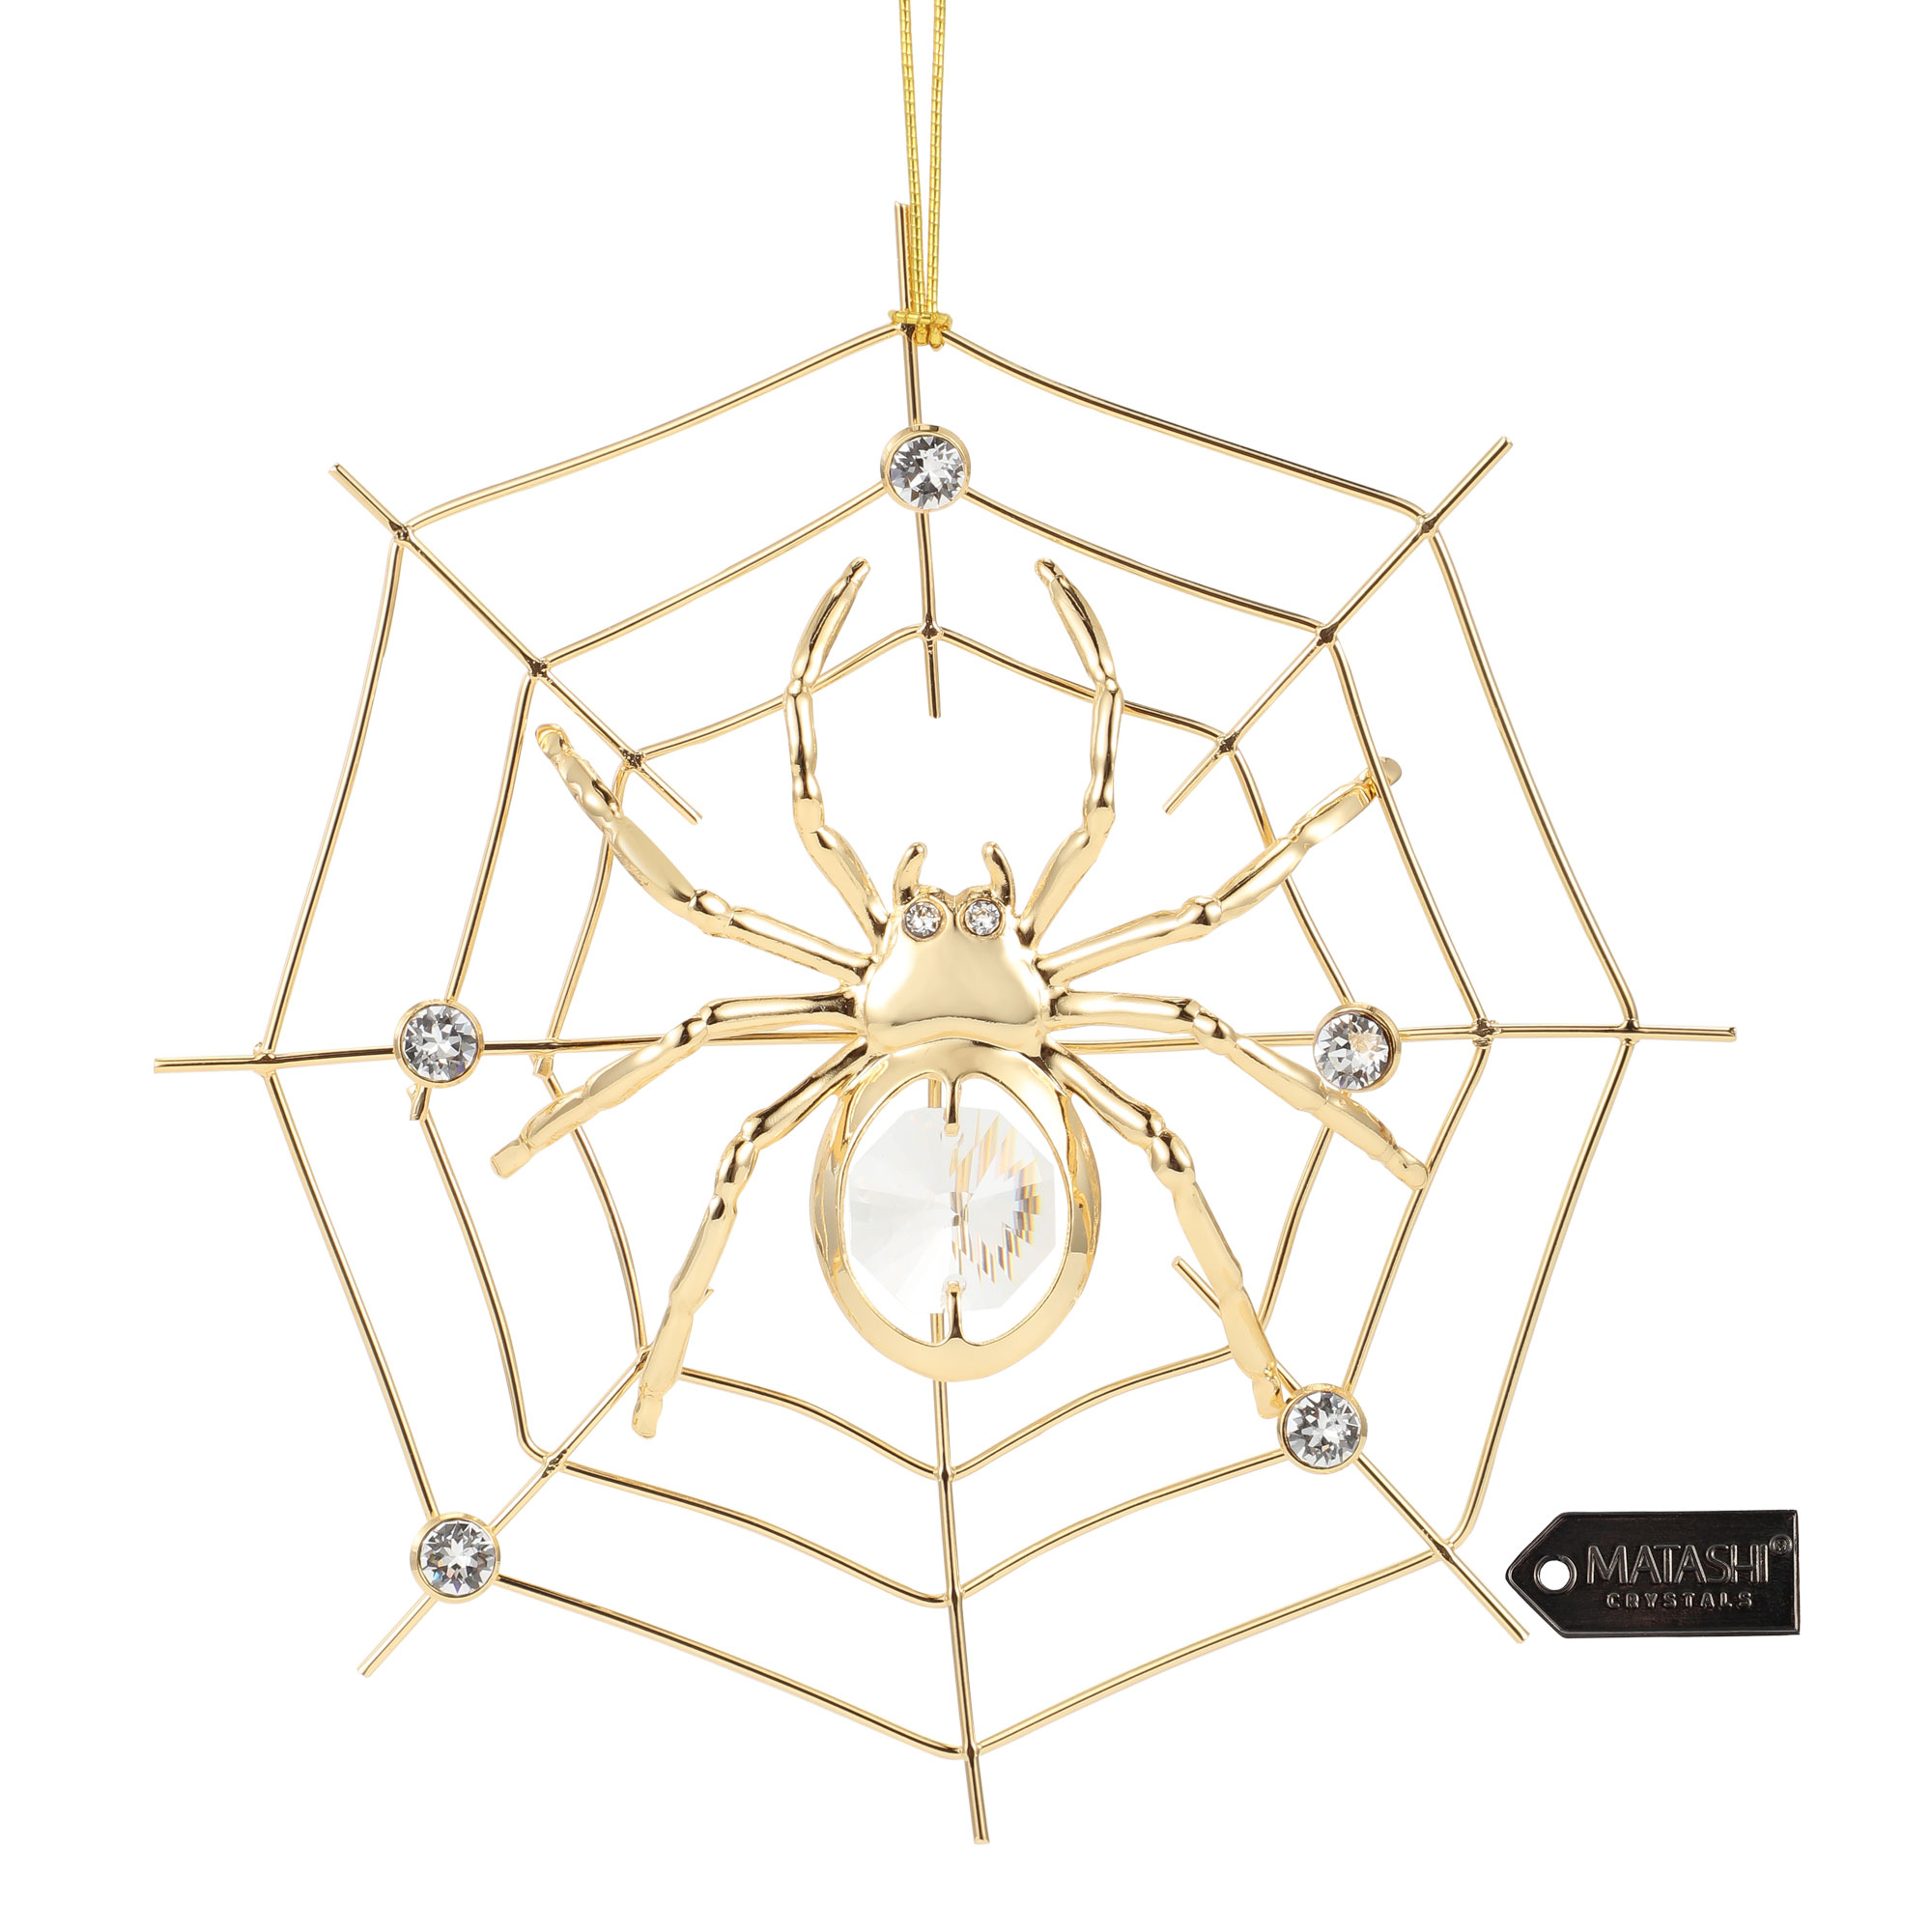 Matashi 24K Gold Plated Crystal Studded Lucky Spider Hanging Ornaments For Christmas Tree Spider Miracle Traditions, Home Decor